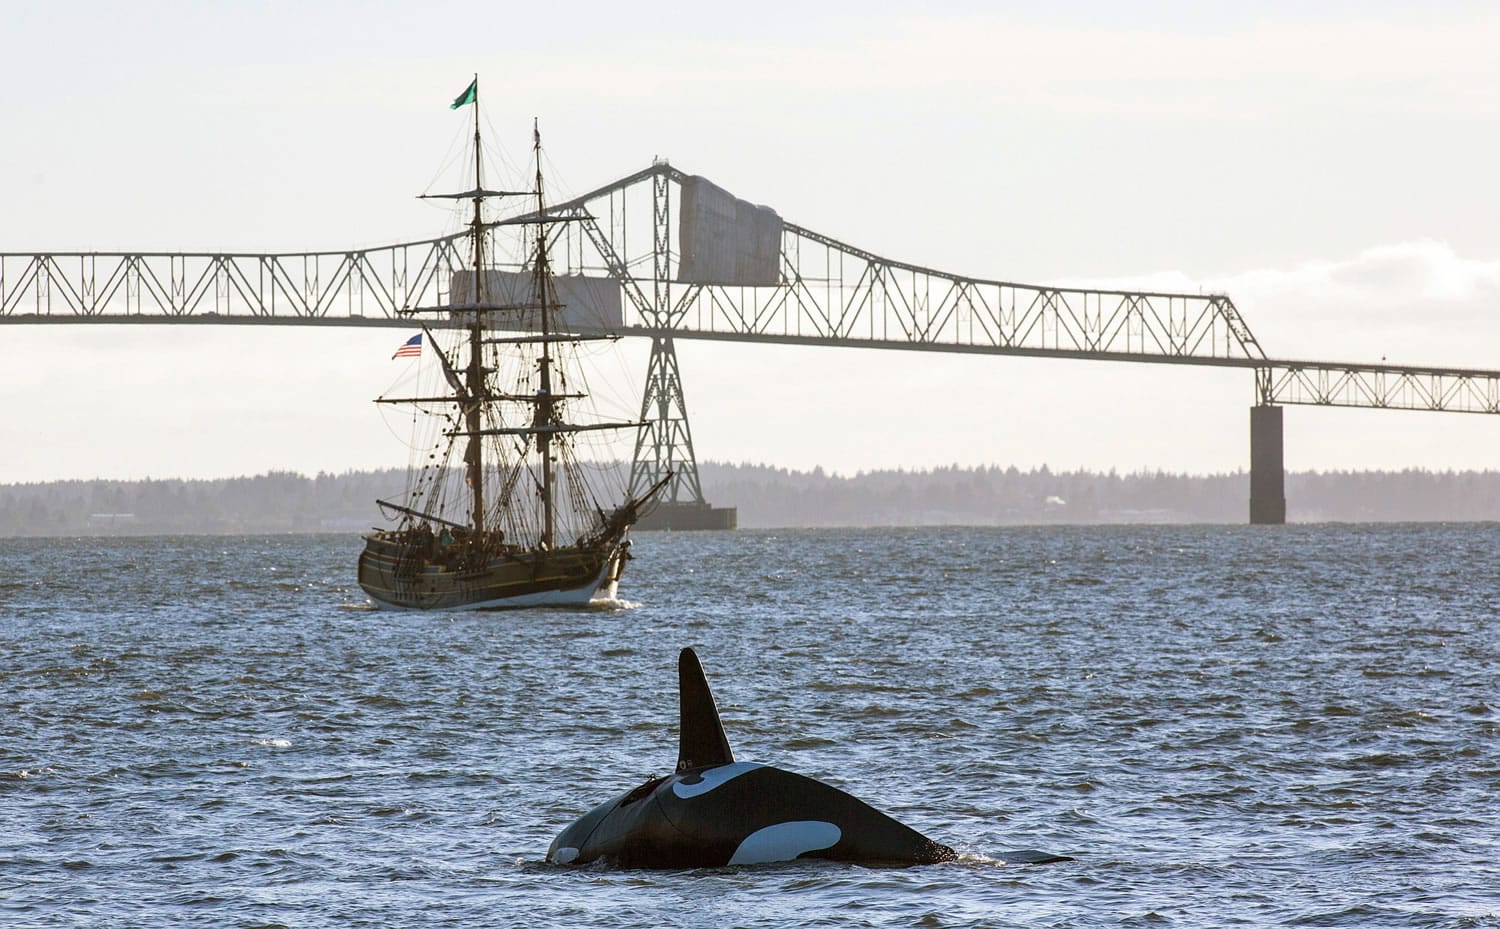 A fake orca in the mouth of the Columbia River with a pirate ship and the Astoria Megler bridge in the background